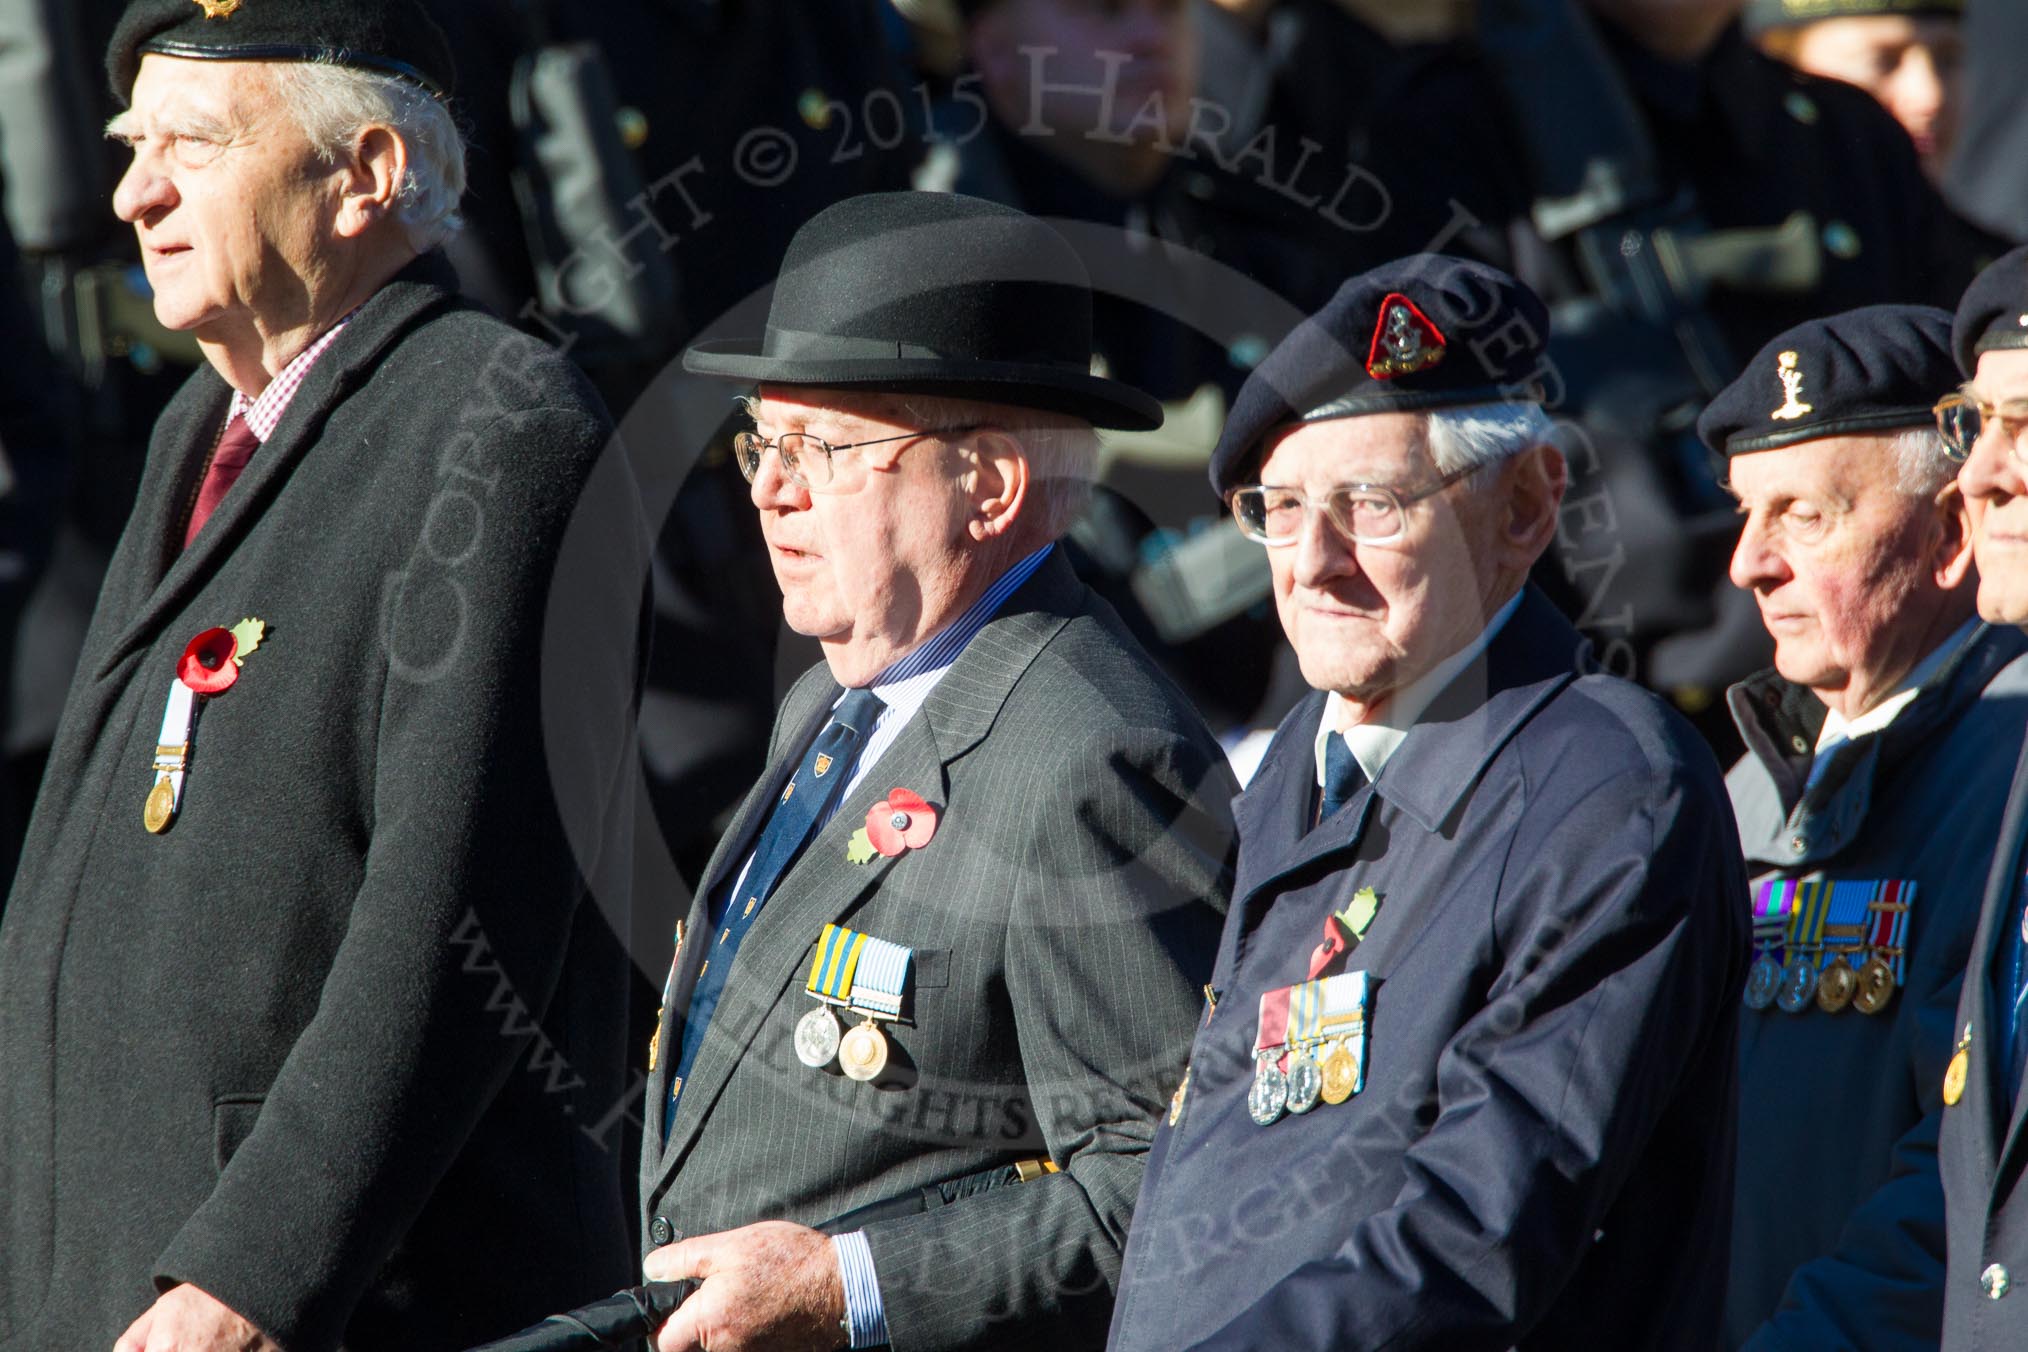 Remembrance Sunday Cenotaph March Past 2013: E40 - Association of Royal Yachtsmen..
Press stand opposite the Foreign Office building, Whitehall, London SW1,
London,
Greater London,
United Kingdom,
on 10 November 2013 at 11:49, image #716